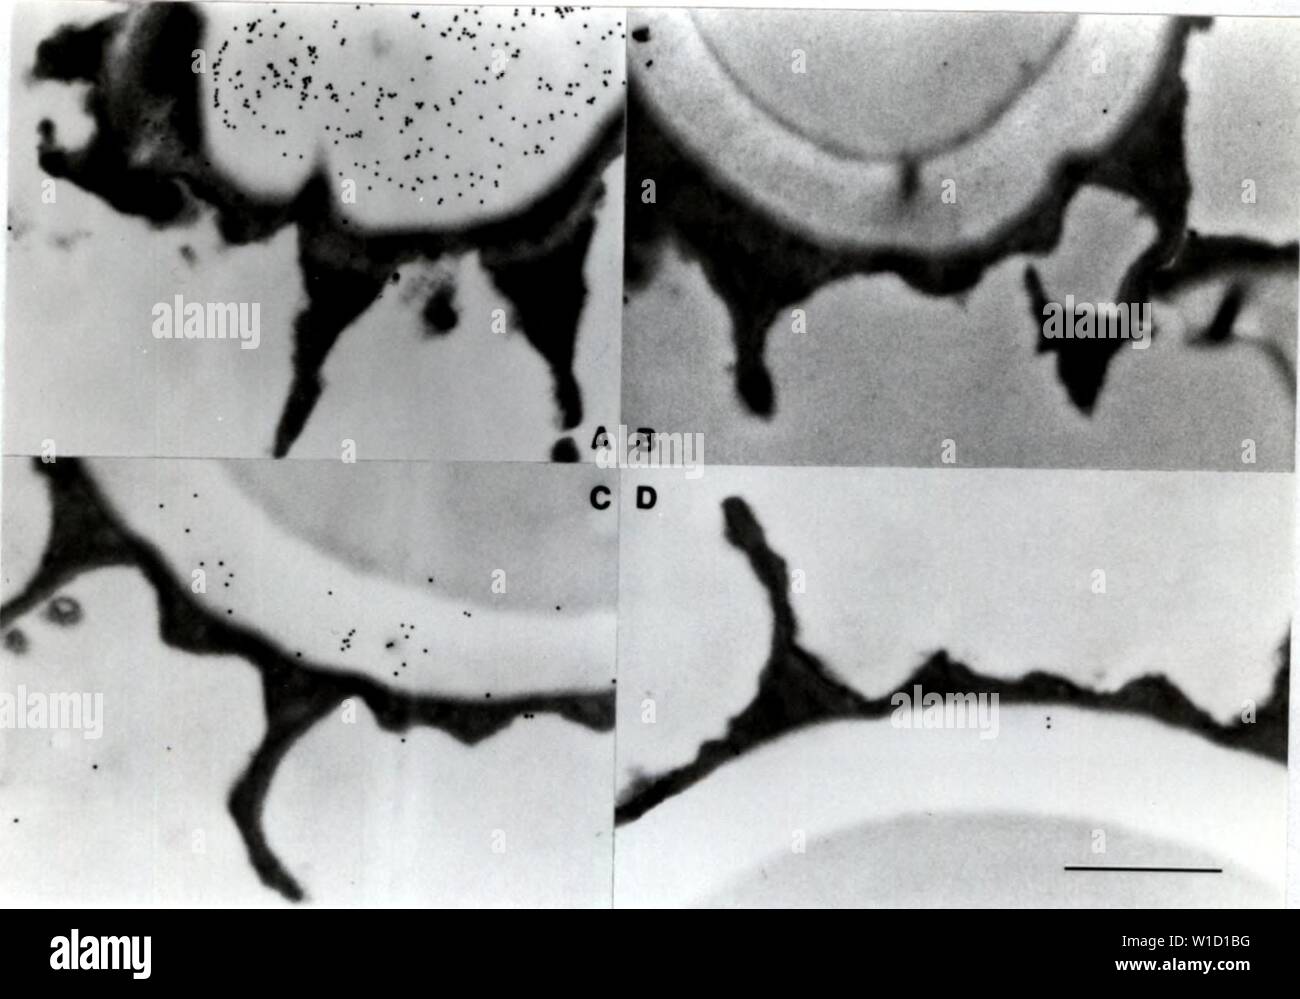 Archive image from page 84 of Development of cytochemical methods for. Development of cytochemical methods for the study of ascospore wall biogenesis and maturation . developmentofcyt00lusk Year: 1991  &gt; â¢â¢ â¢:Â»&gt;Â« 'V ,..â¢ â¢Cj'-r  T 75    Figure 4.5. Determinant characterization for 8F11. A & C) positive control, without pretreatment; B) pretreated with periodate; D) pretreated with pronase. accomplished by competing off the anti-wall antibodies with clean wall preparation (such as that used for immunogen) prior to incubation of the section(s). This experiment was not preformed due Stock Photo